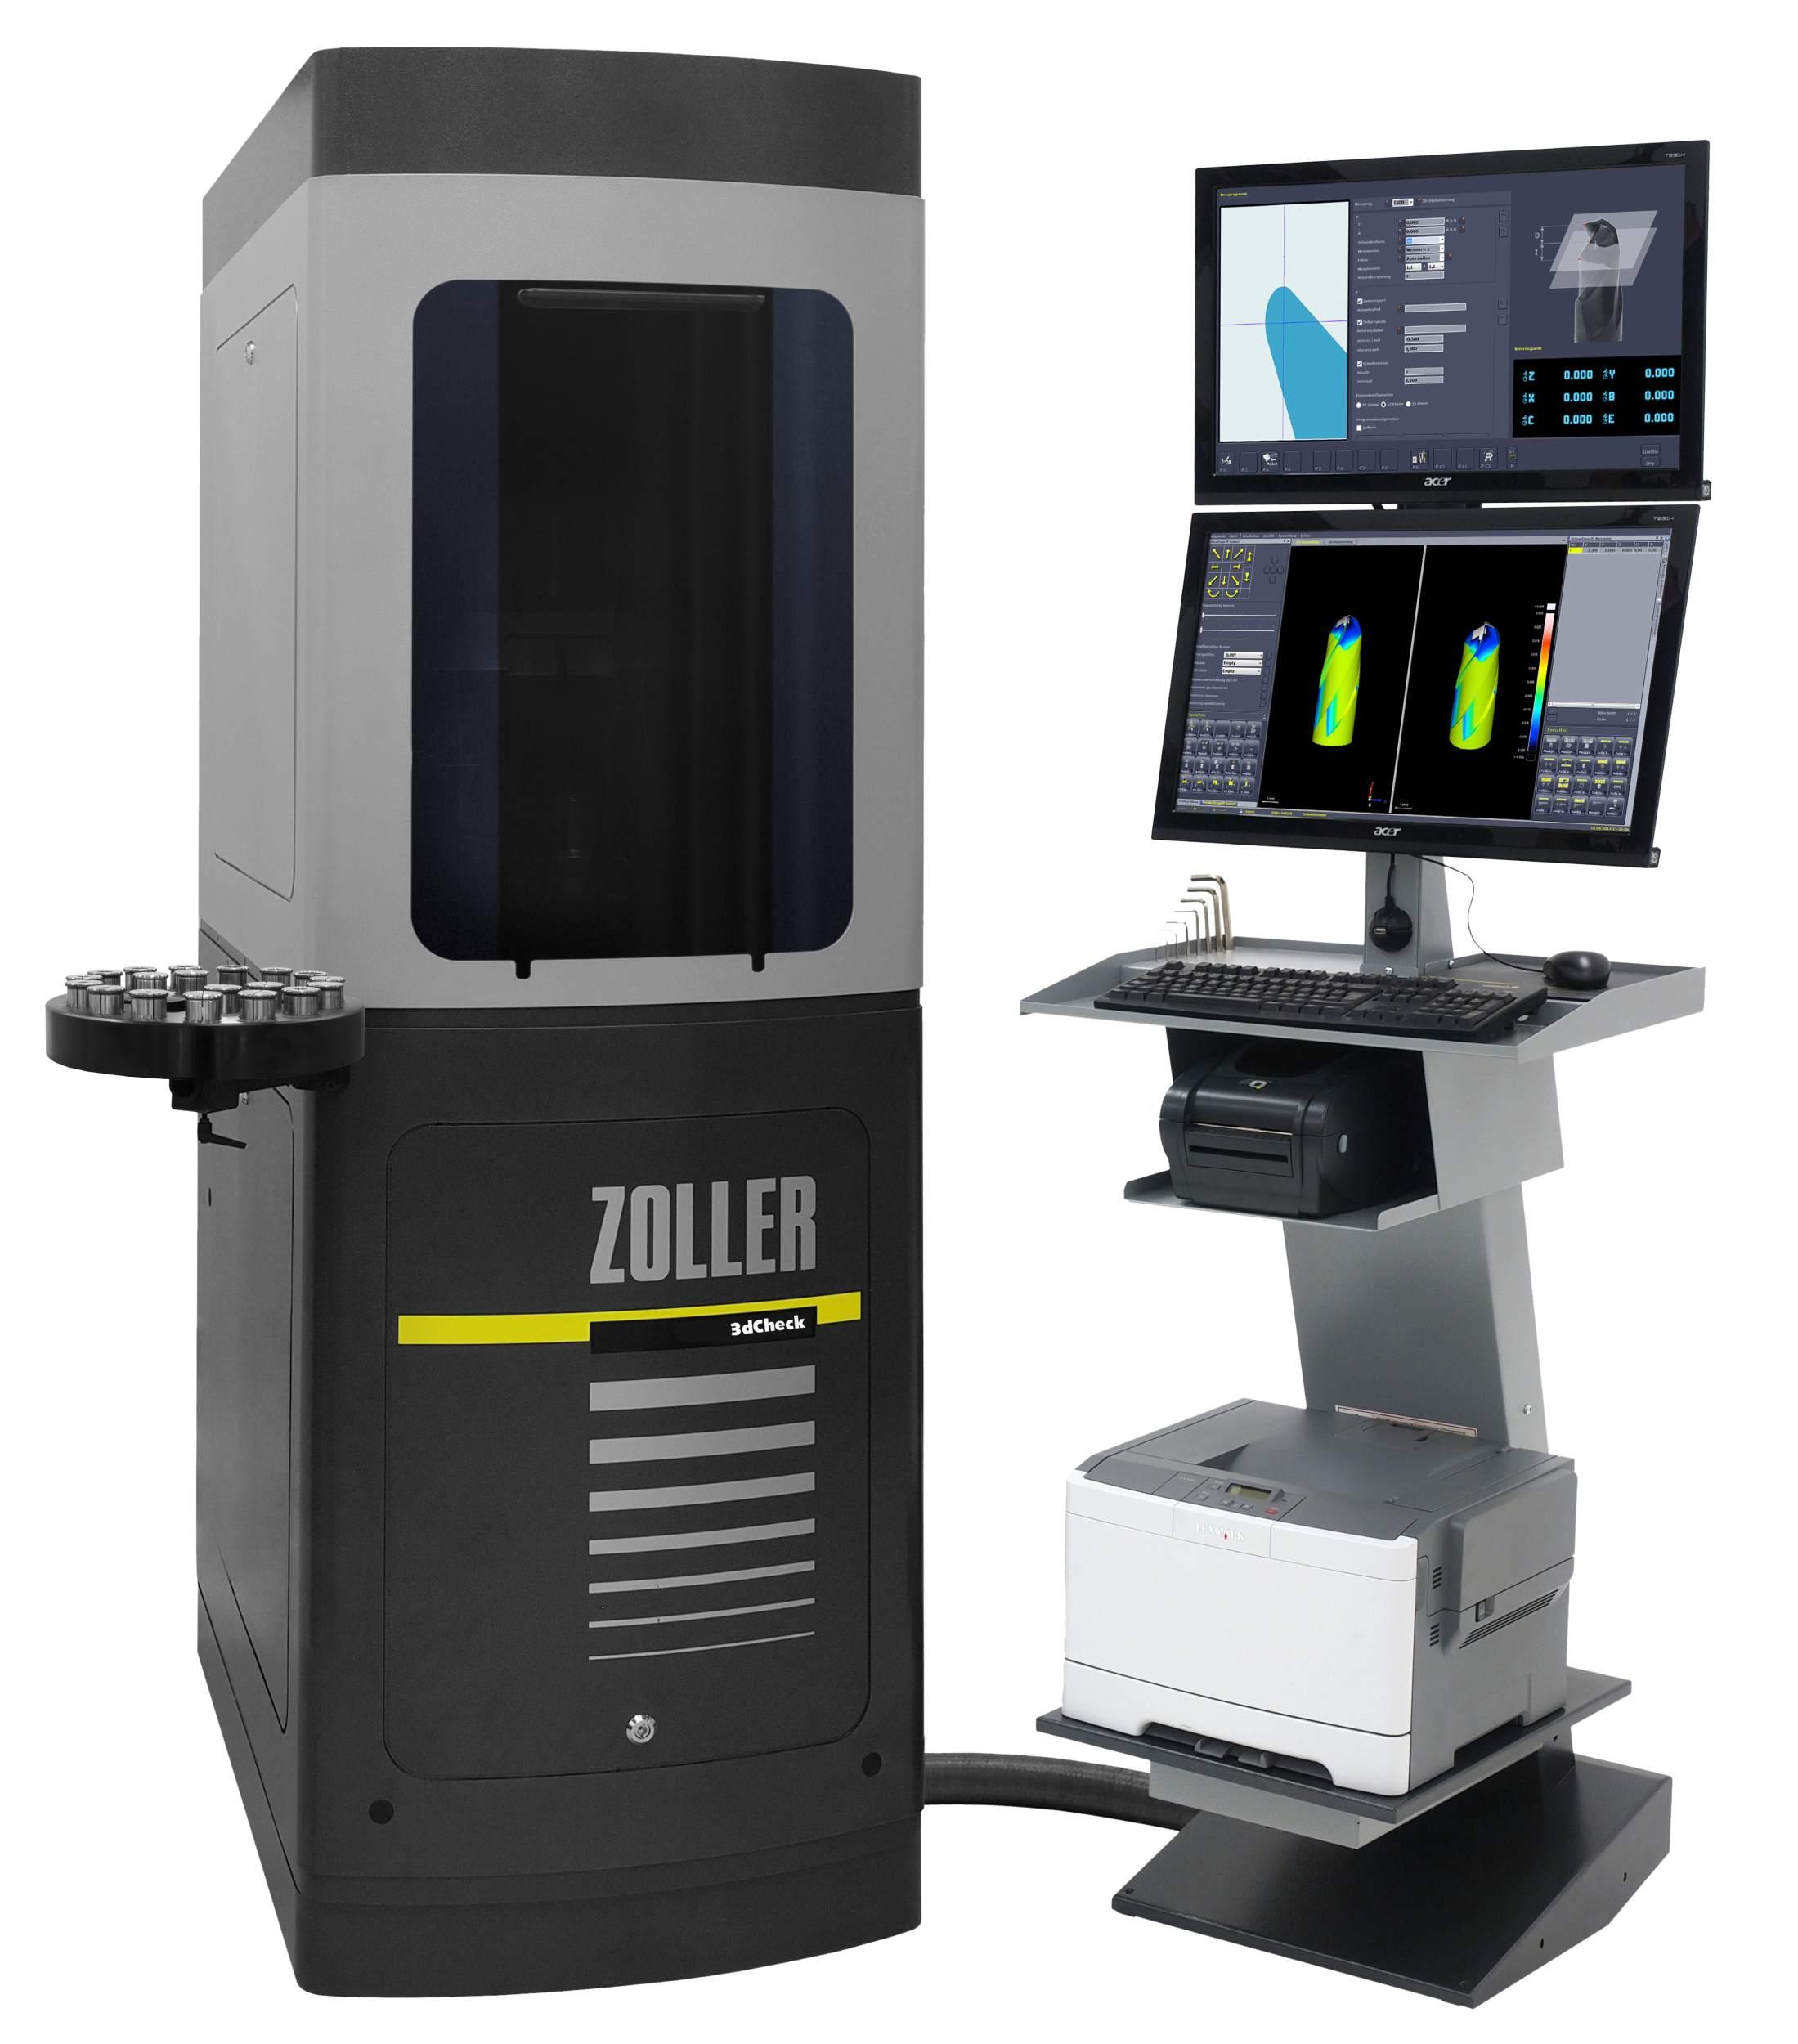 Measuring is easy with Zoller - Canadian Metalworking